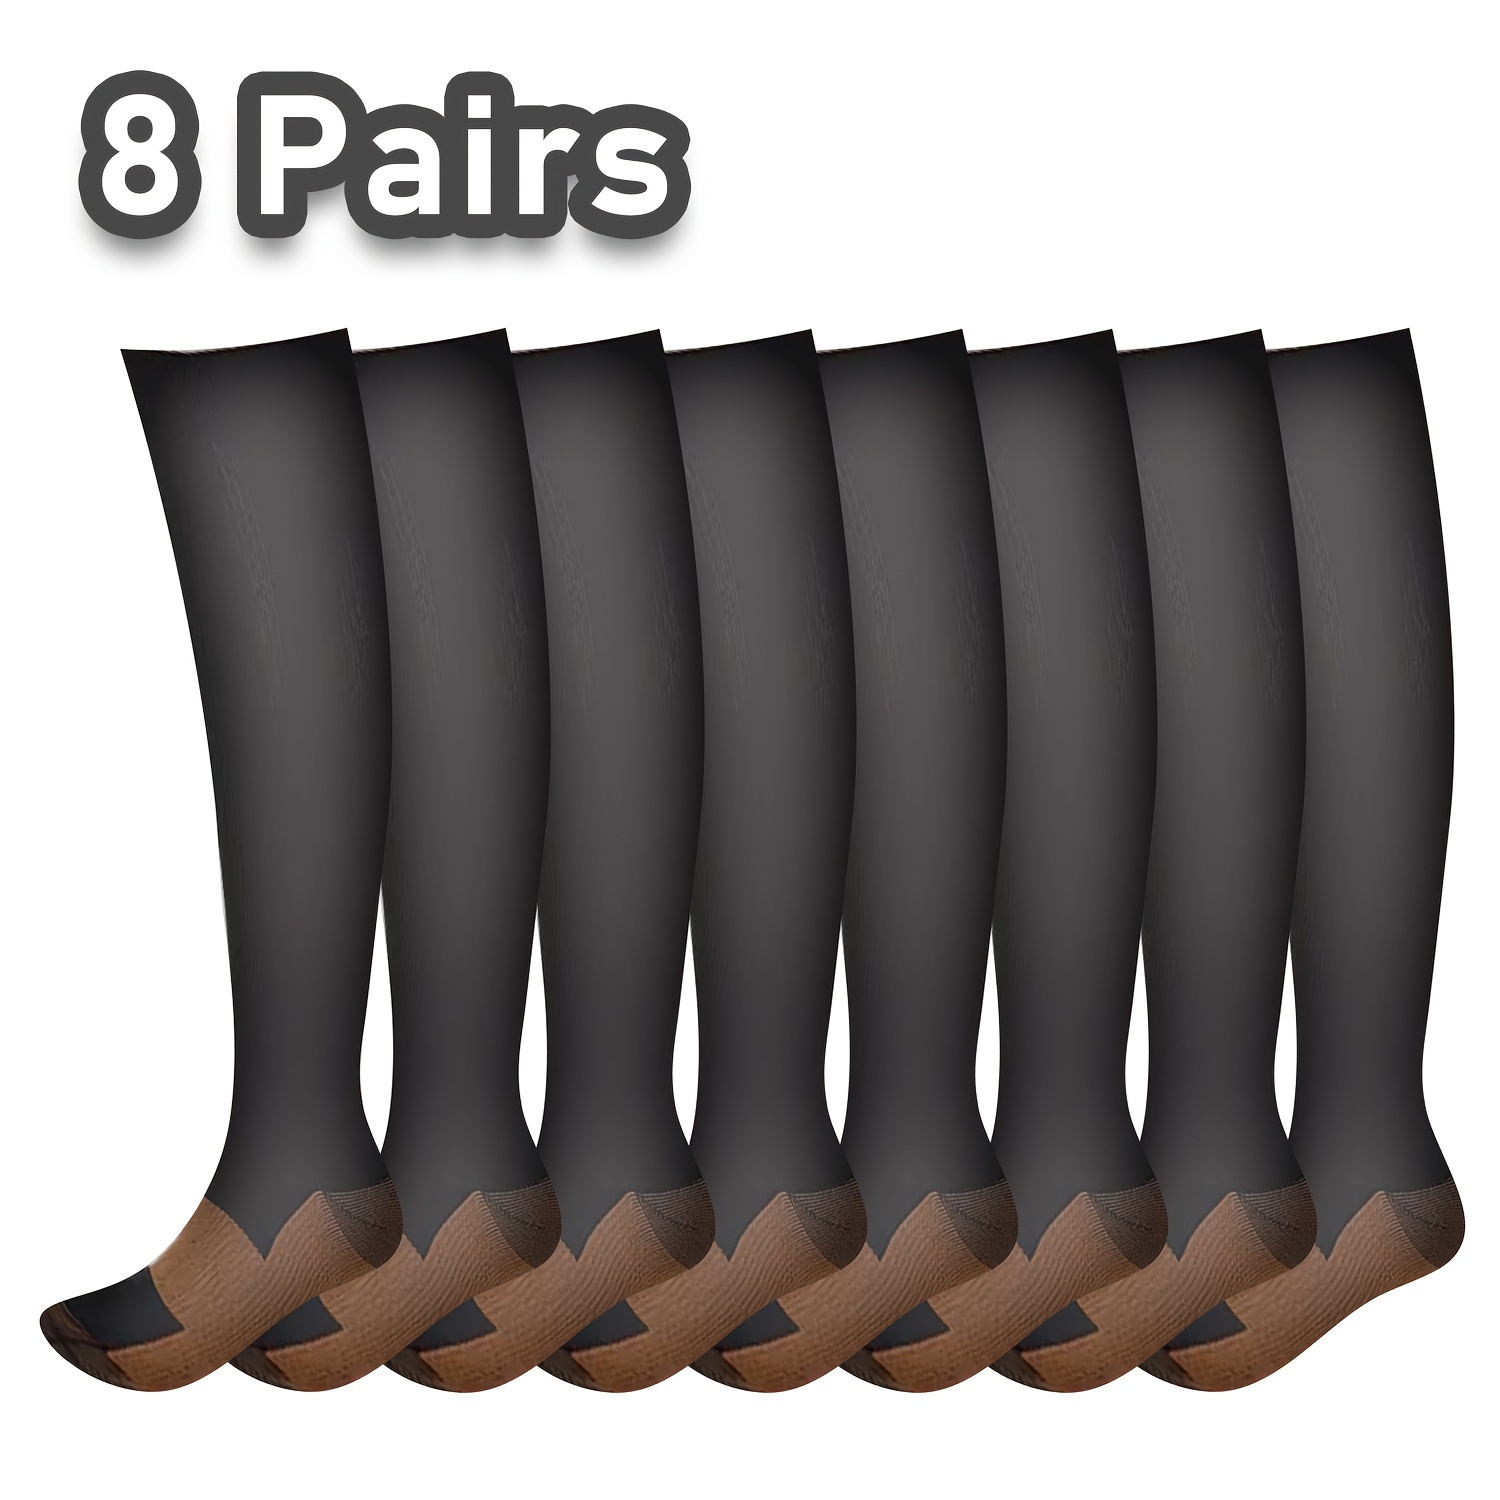 

Copper Compression Socks For Men & Women Circulation-best For Running Hiking Cycling 15-20 Mmhg 8 Pairs